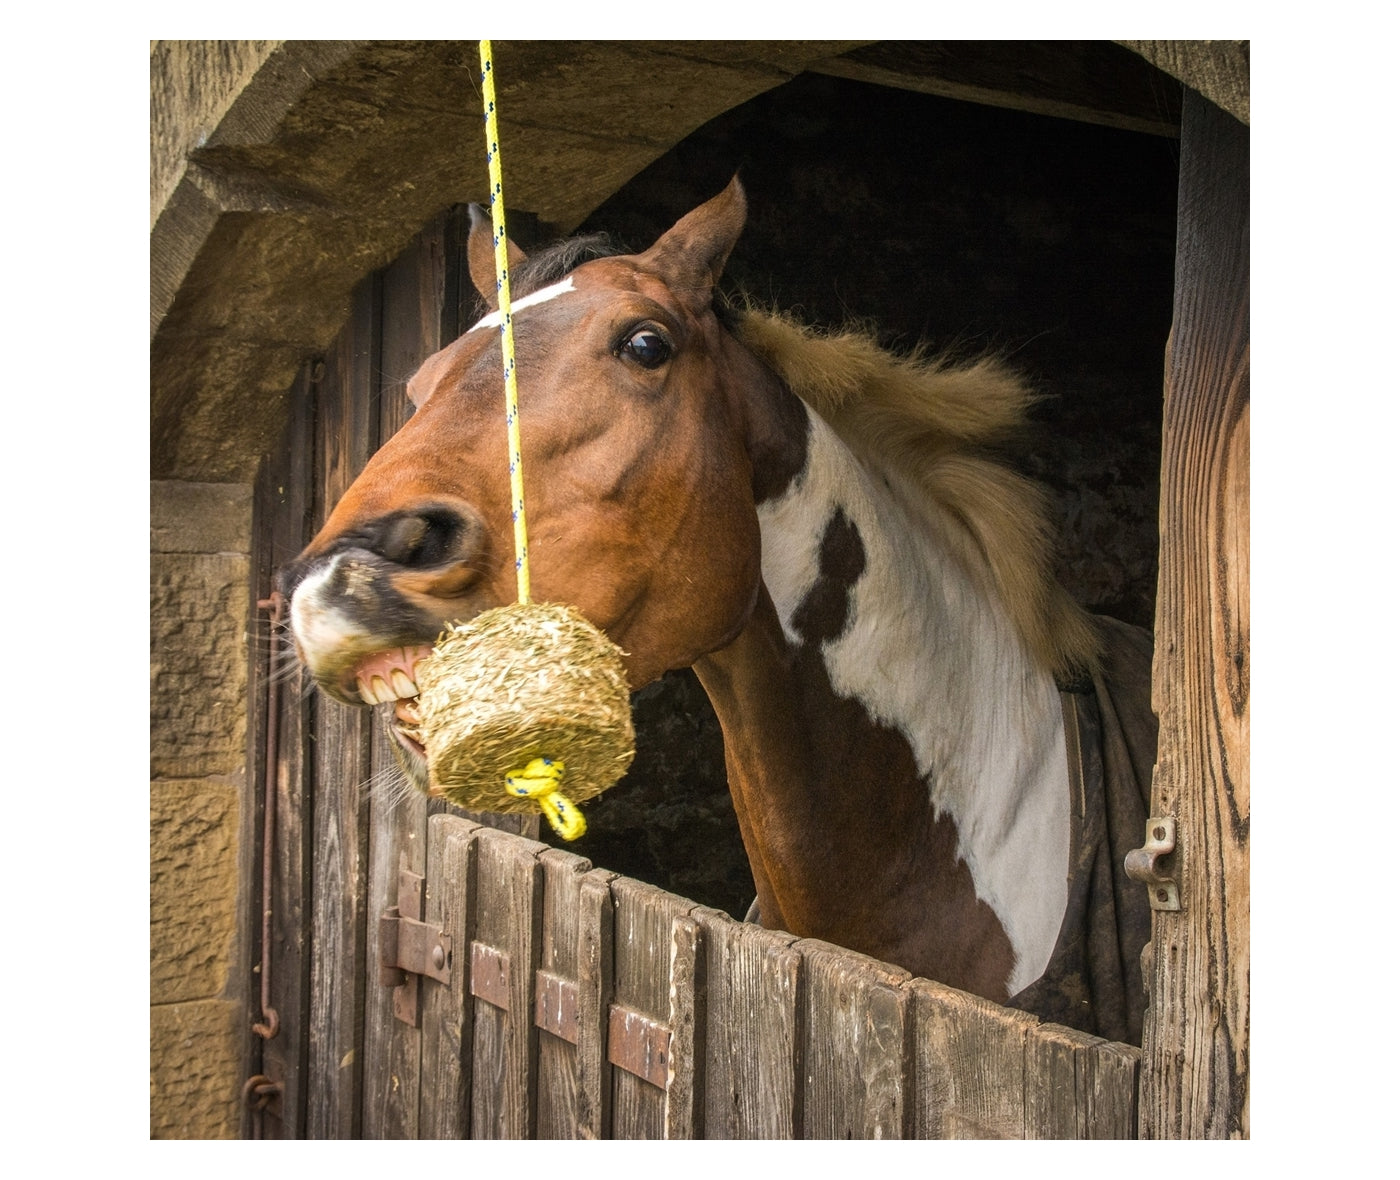 Silvermoor Swingers (Magical Minty Unicorn) | Horse Feed - Buy Online SPR Centre UK